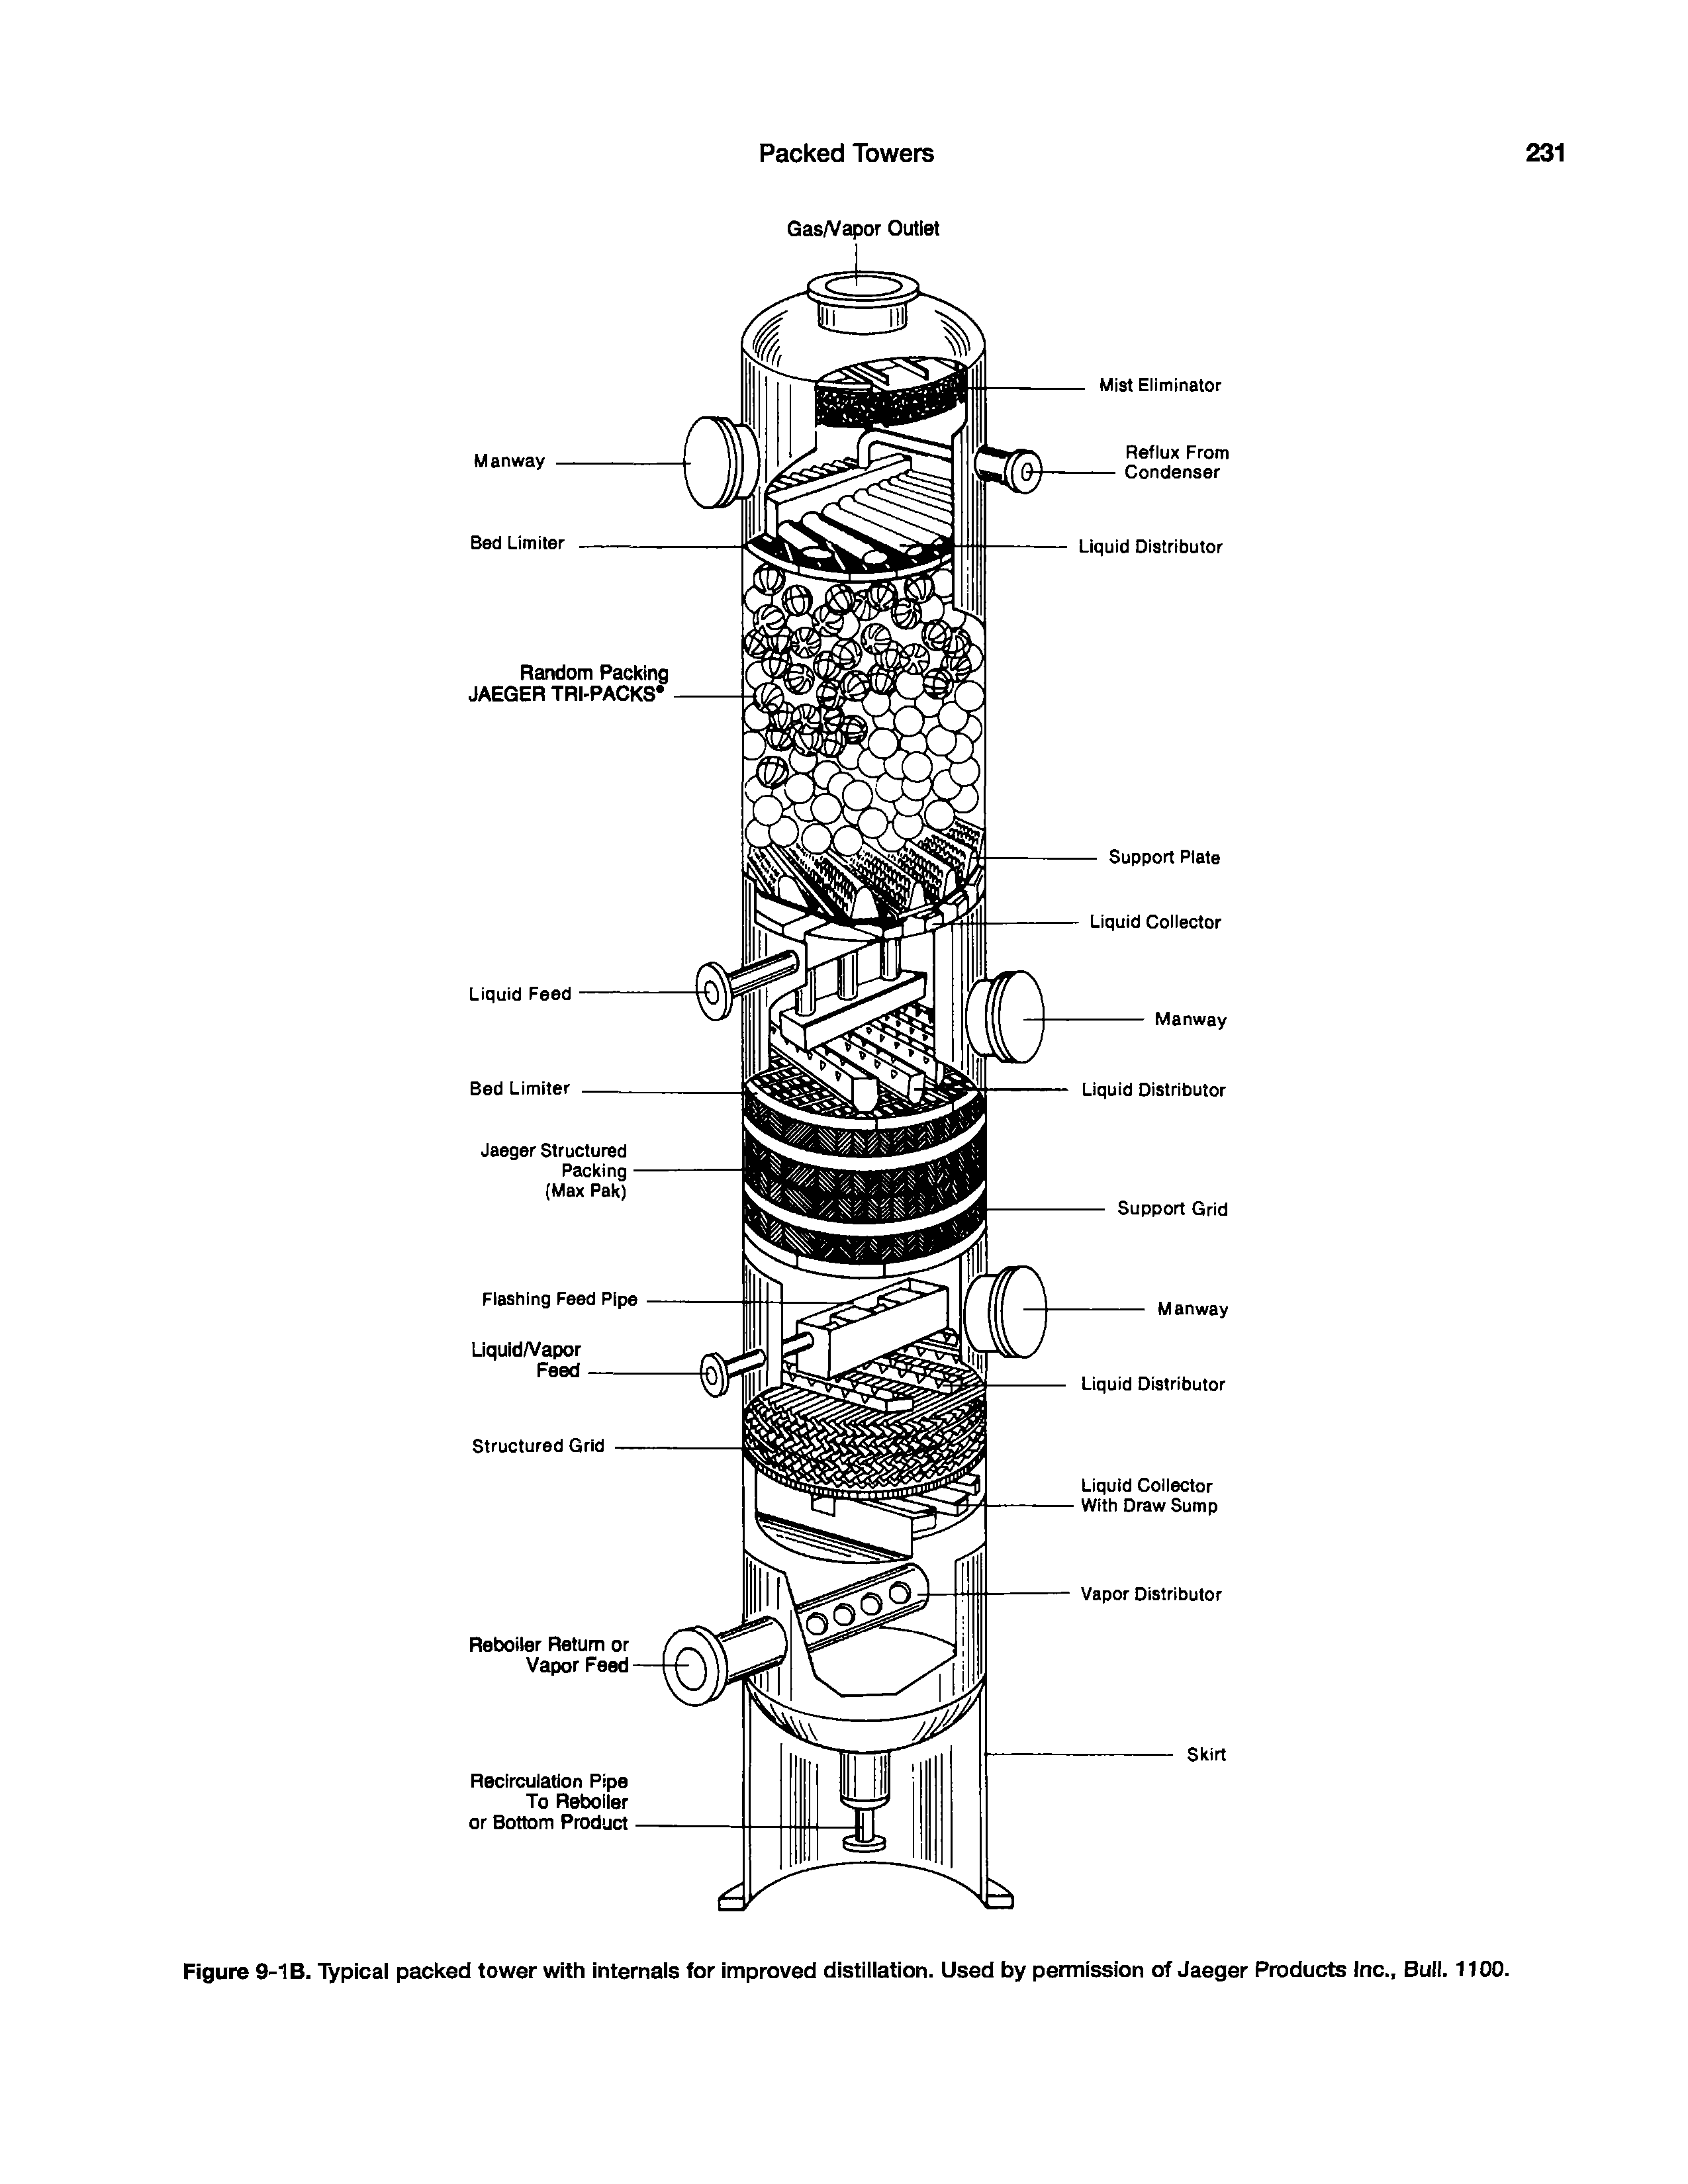 Figure 9-1B. Typical packed tower with internals for improved distillation. Used by permission of Jaeger Products Inc., Bull. 1100.